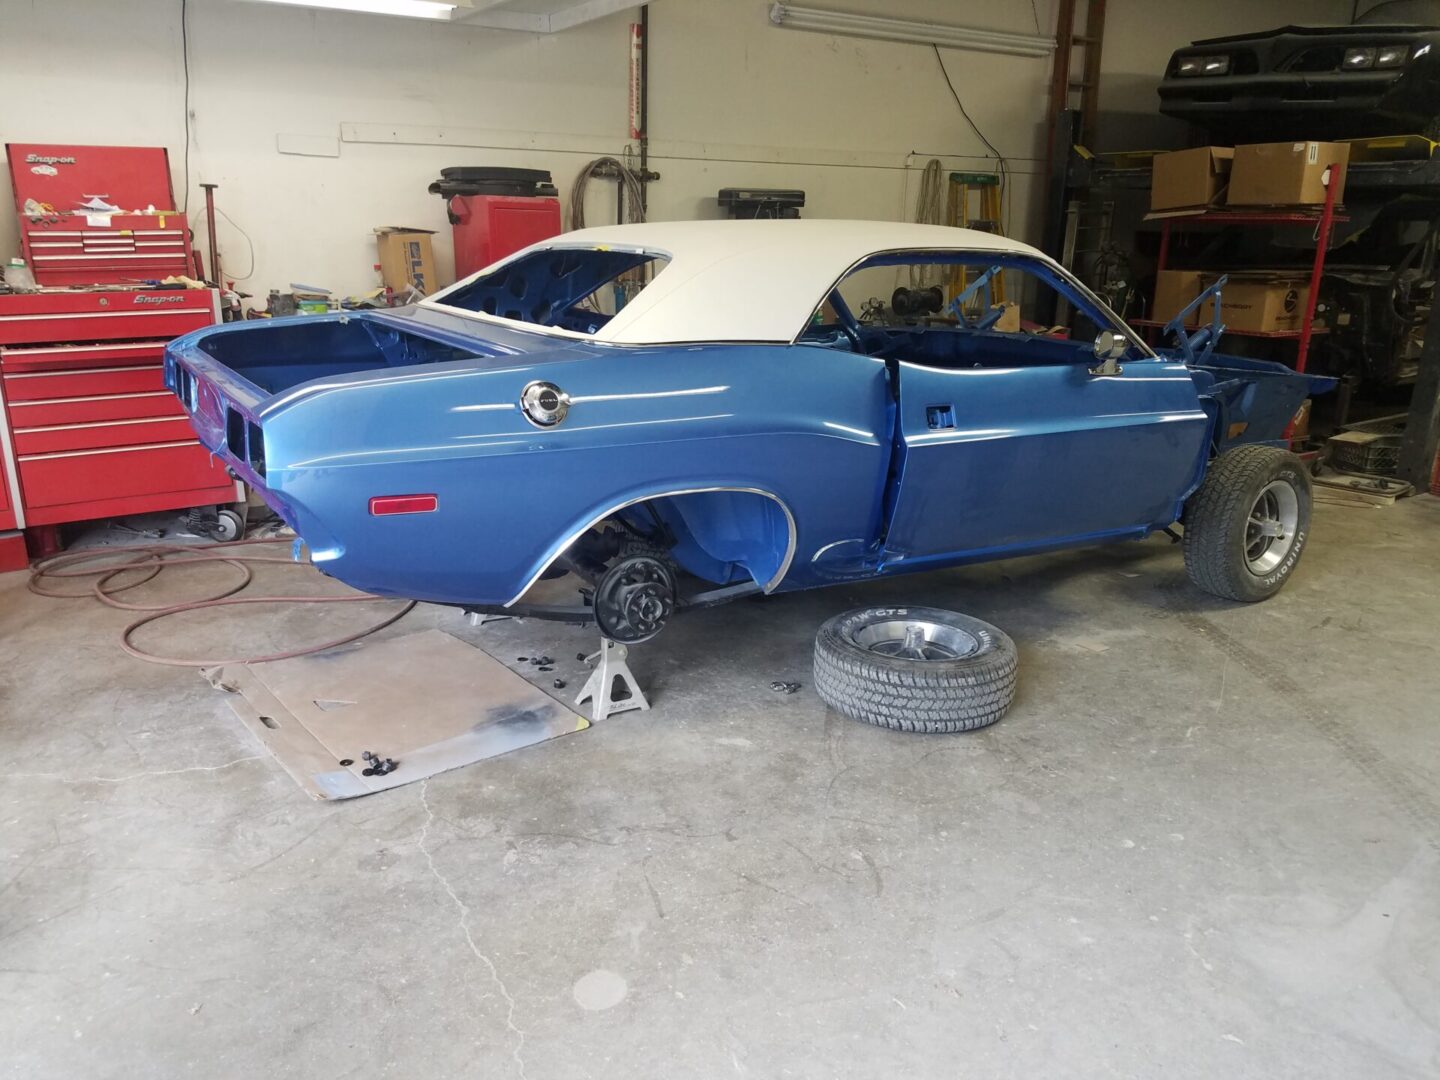 A blue 1972 Dodge Challenger Rallye without back wheels